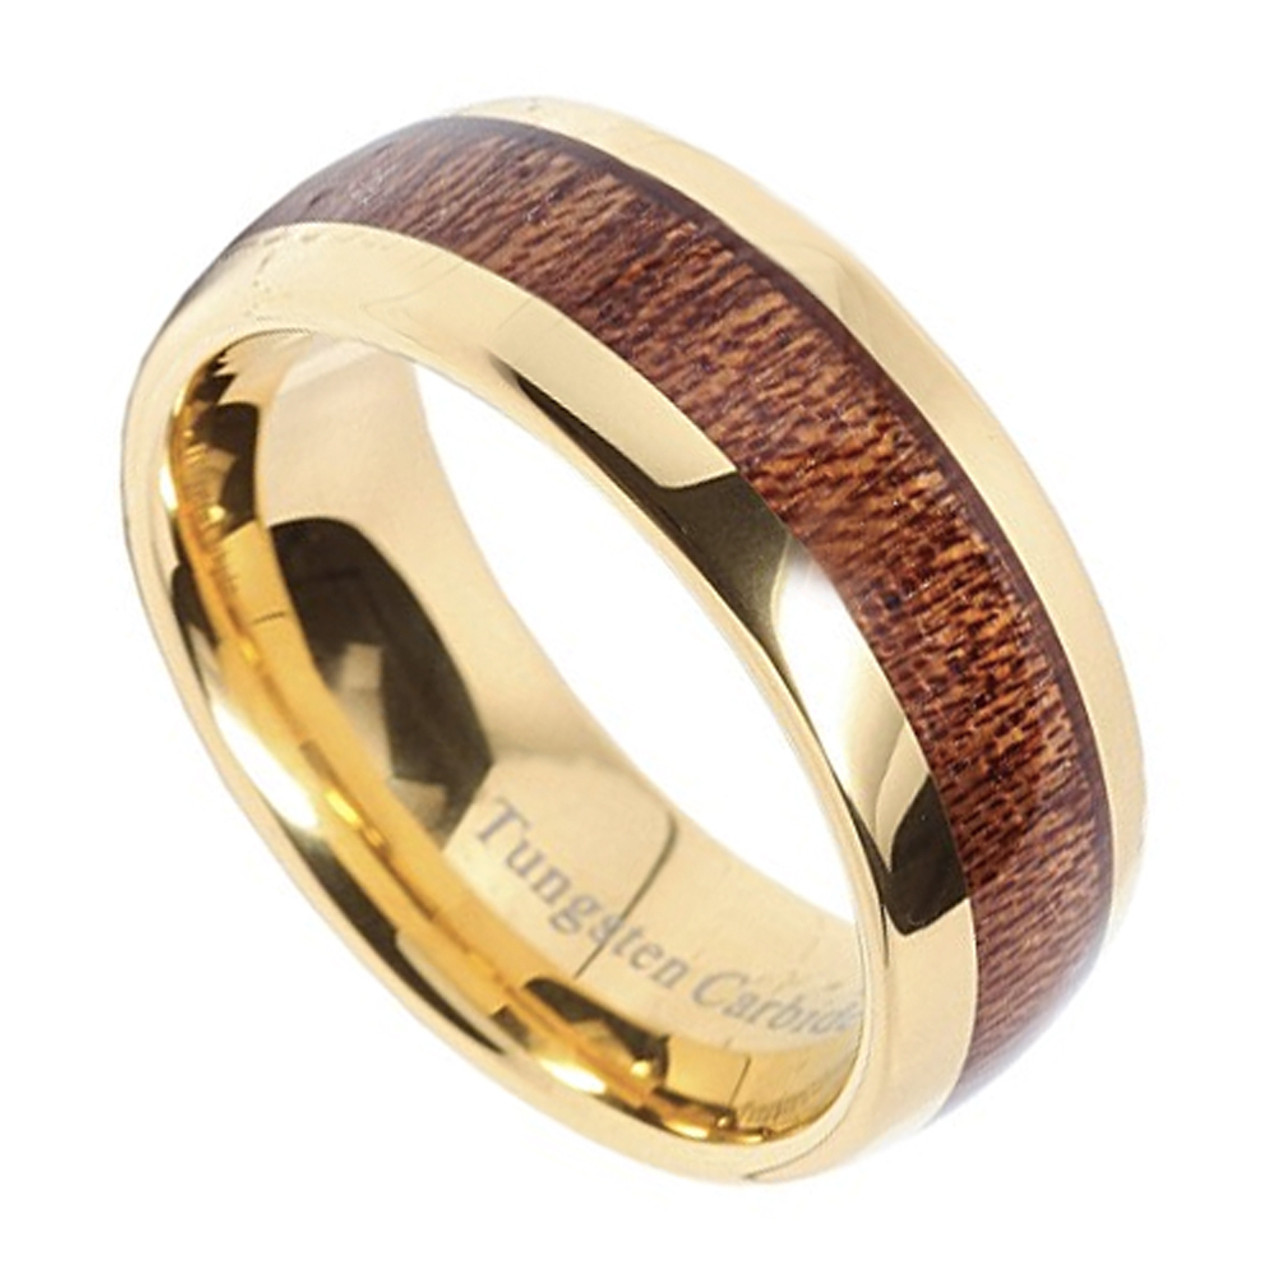 Men's Tungsten Wedding Bands (8mm). Wood Inlay and Yellow Gold Tone. Tungsten Ring with High Polish Dark Wood Inlay. Domed Ring